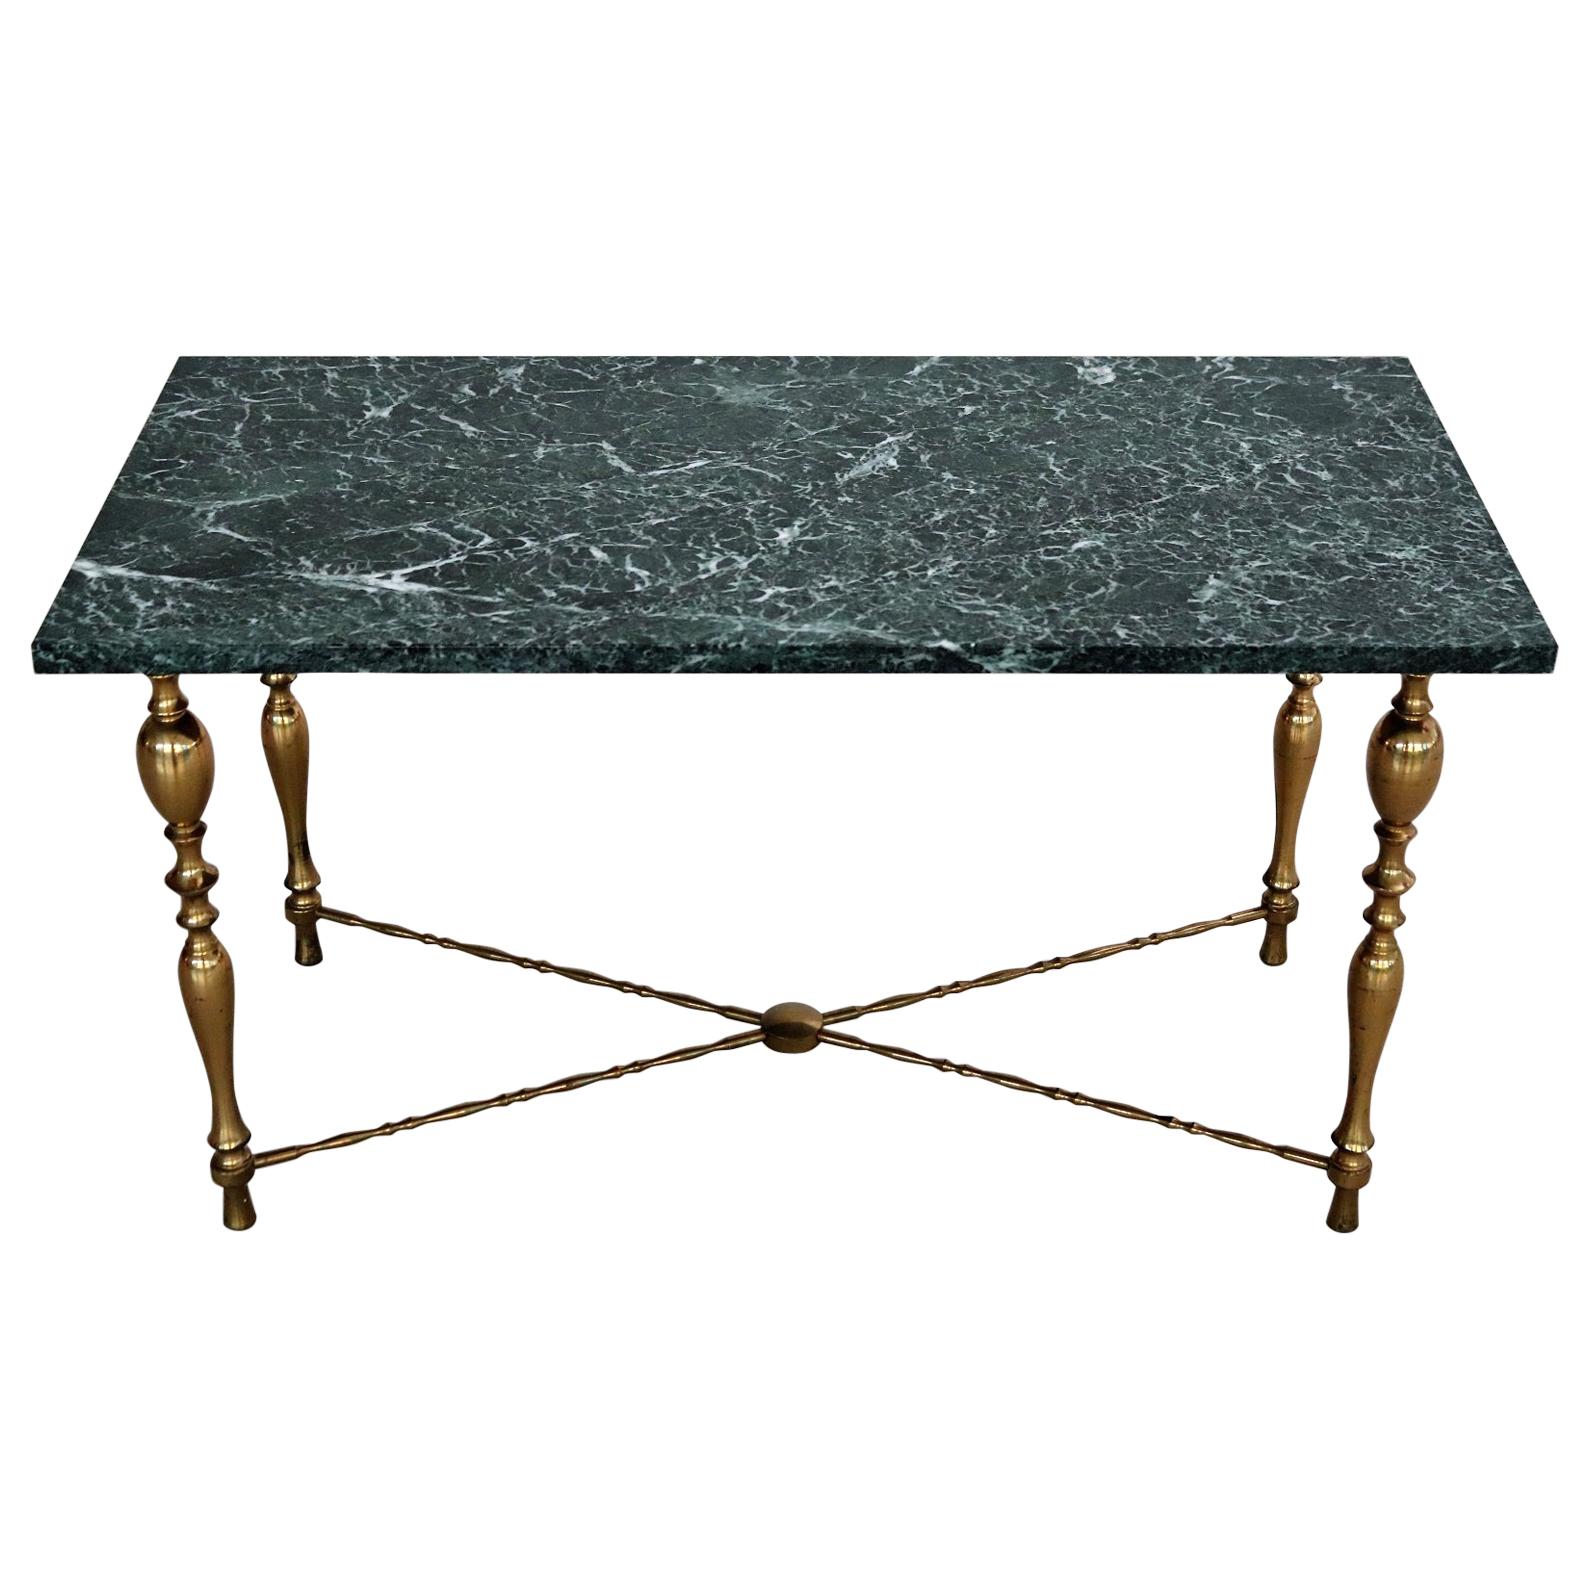 Italian Midcentury Coffe Table with Marble Top and Brass Base, 1950s